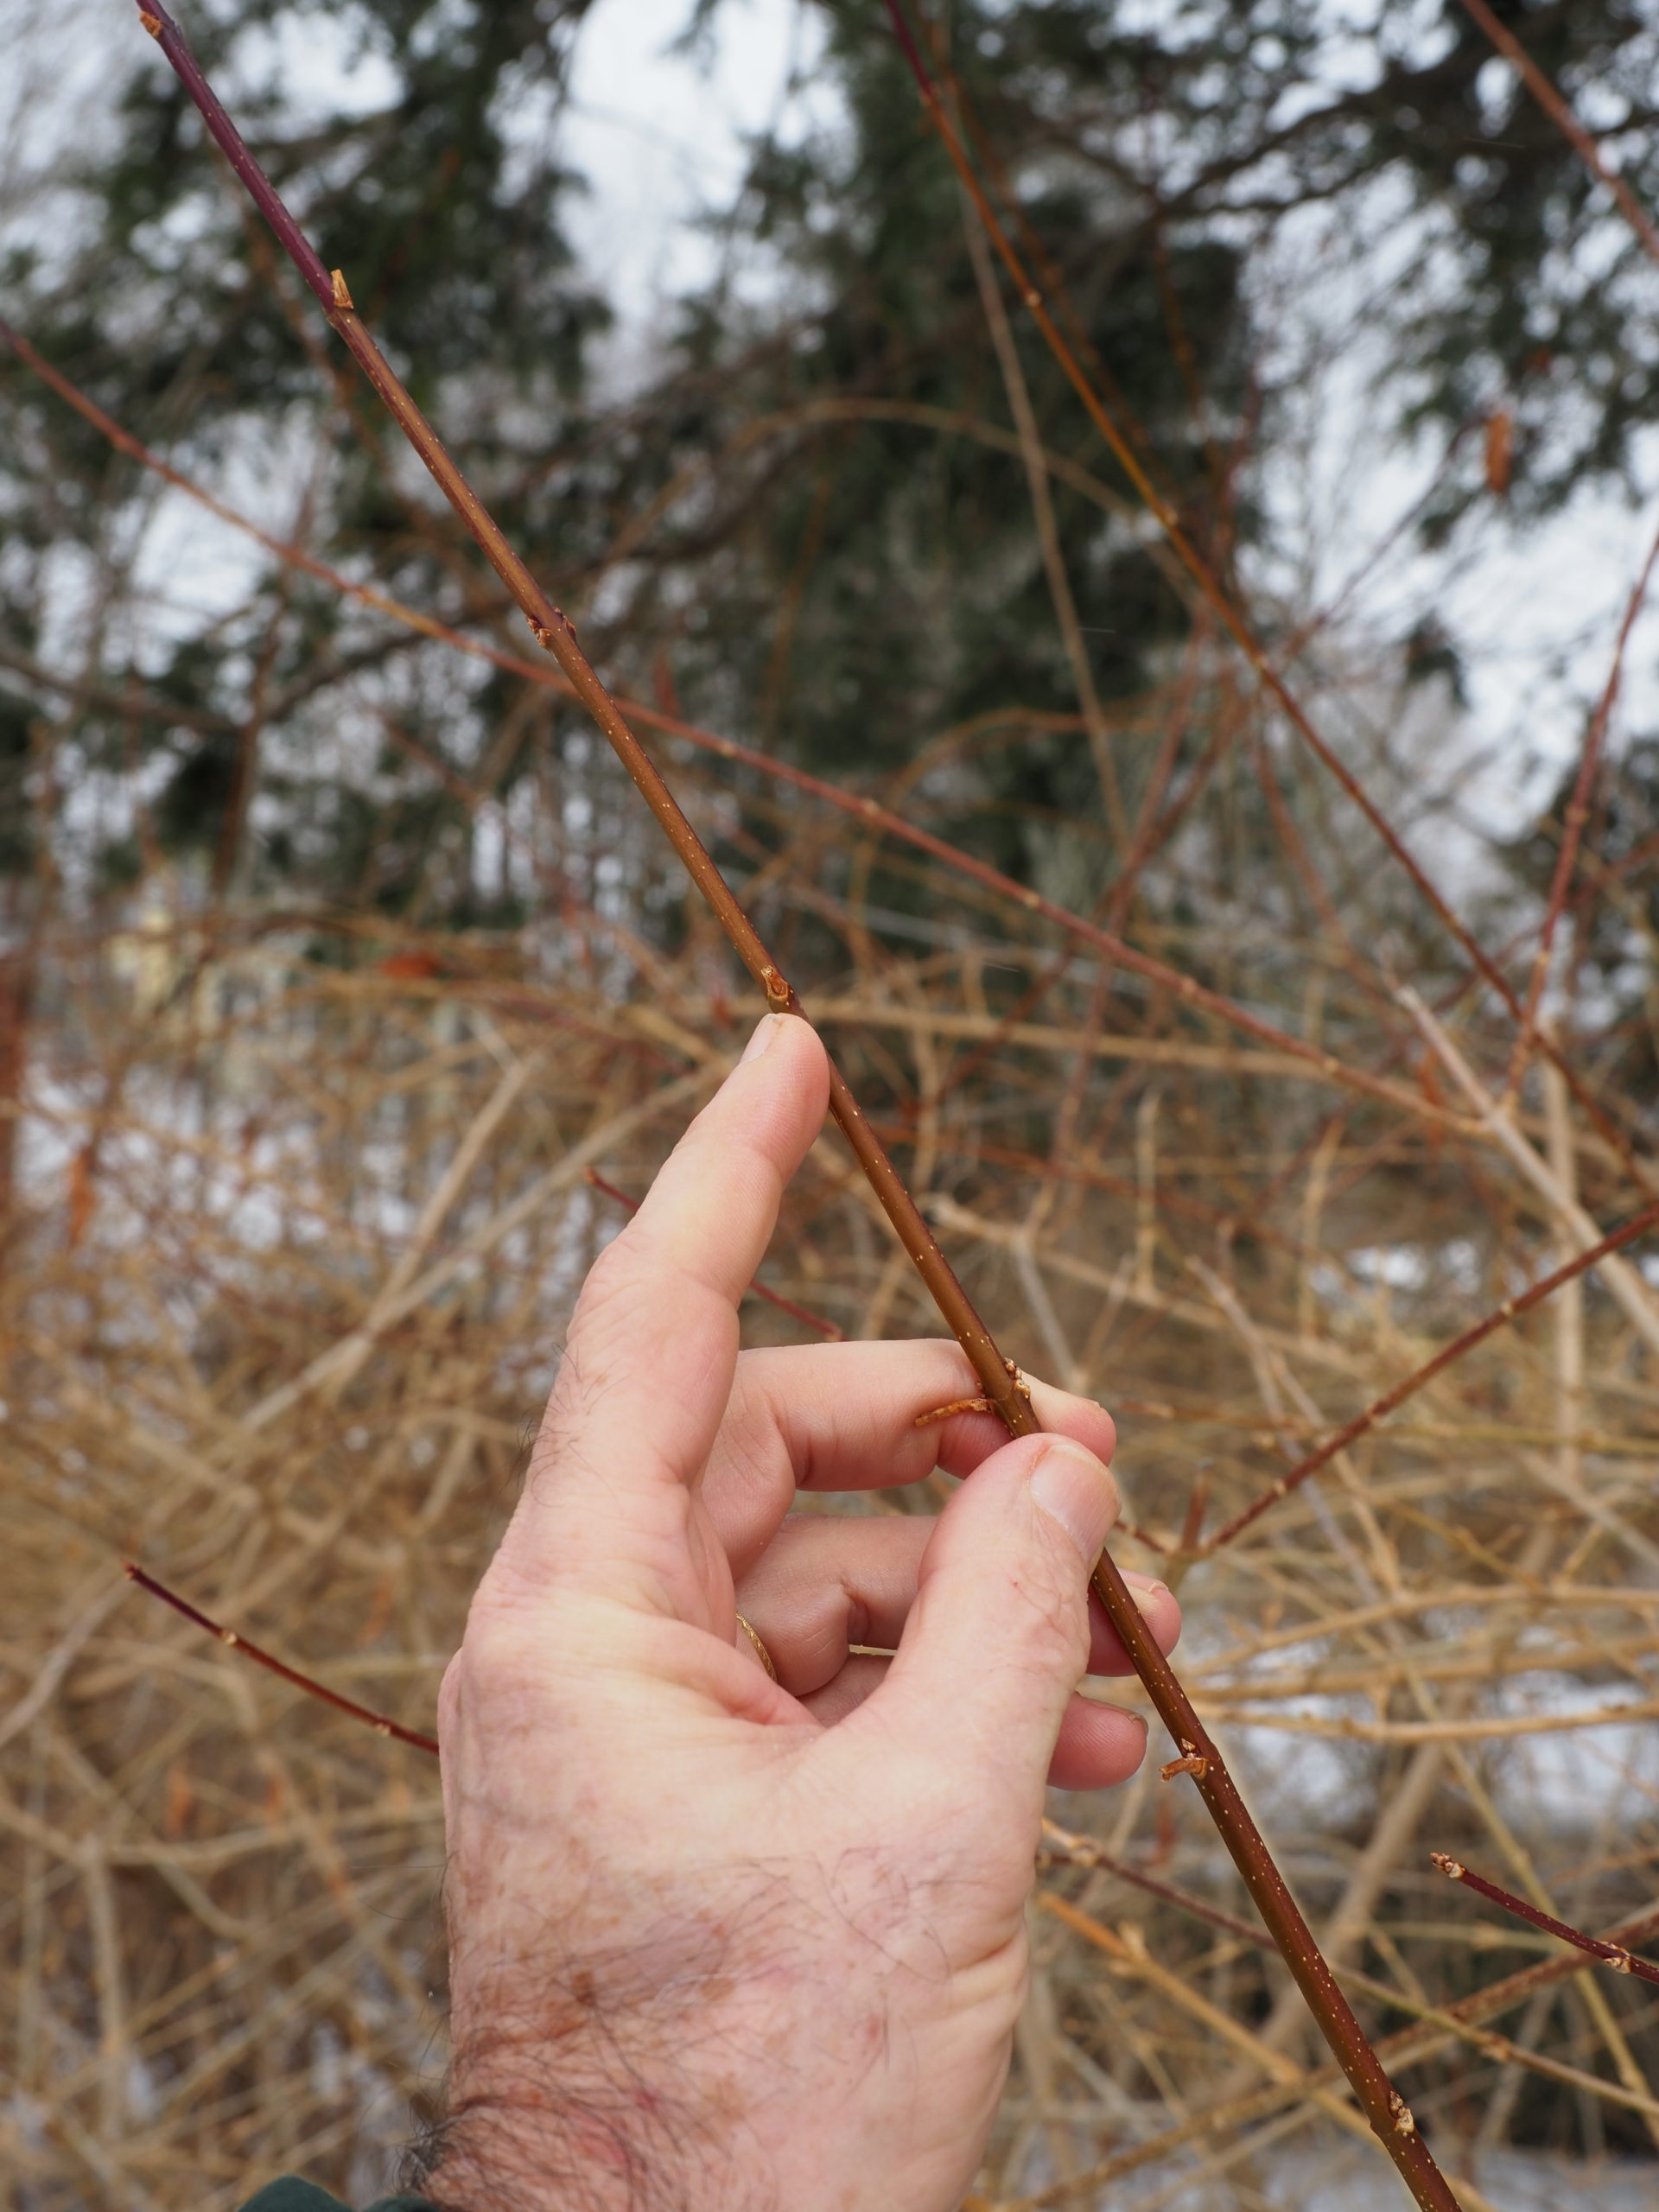 When choosing forsythia canes for forcing avoid canes with long spaces between the buds and canes with small buds. In this case, the buds are only about a quarter inch long with bud spacing of more than 4 inches. This one won’t make a nice display. ANDREW MESSINGER